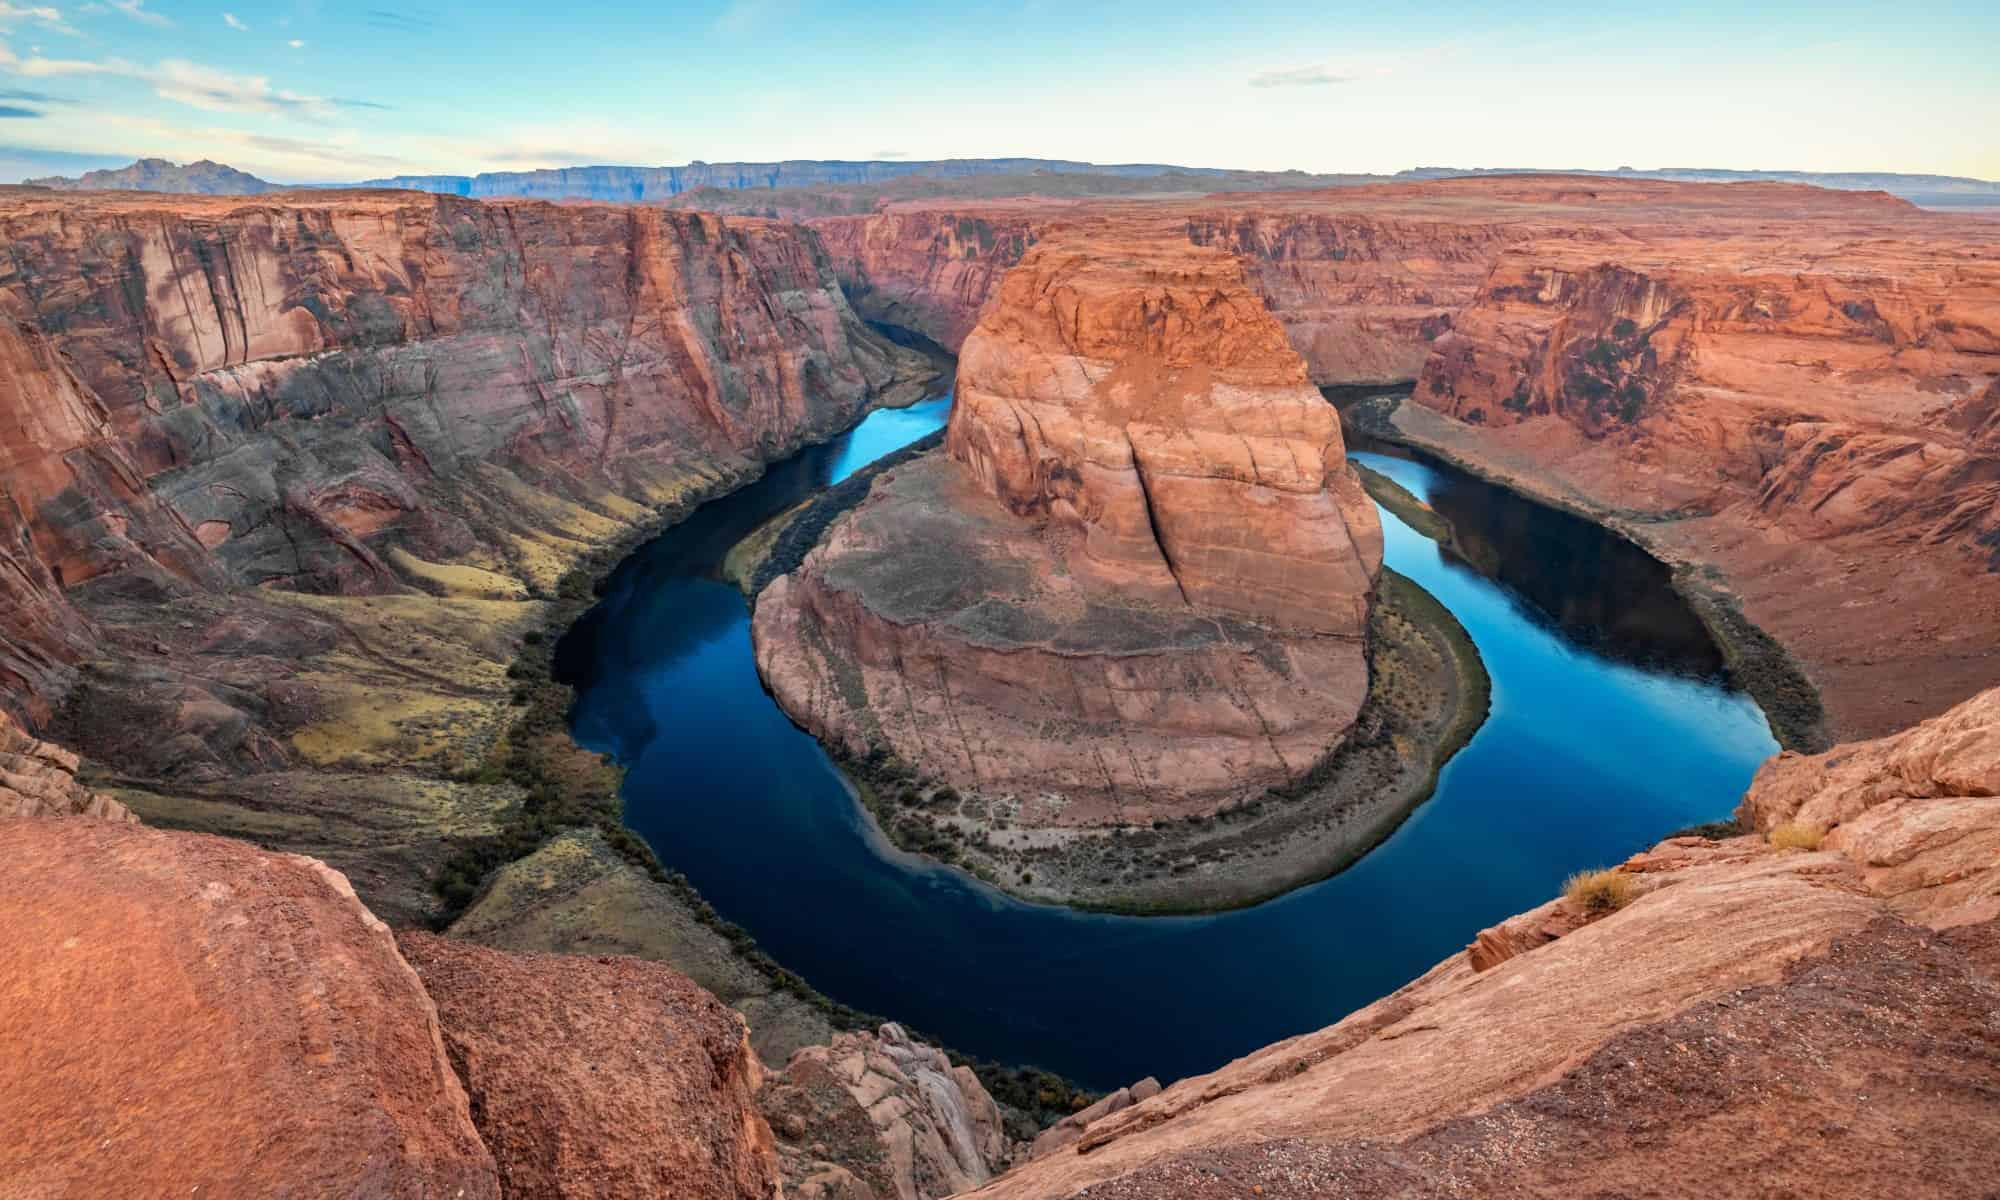 New Yorkers are betting big on a scarce resource by purchasing water rights on the Colorado River